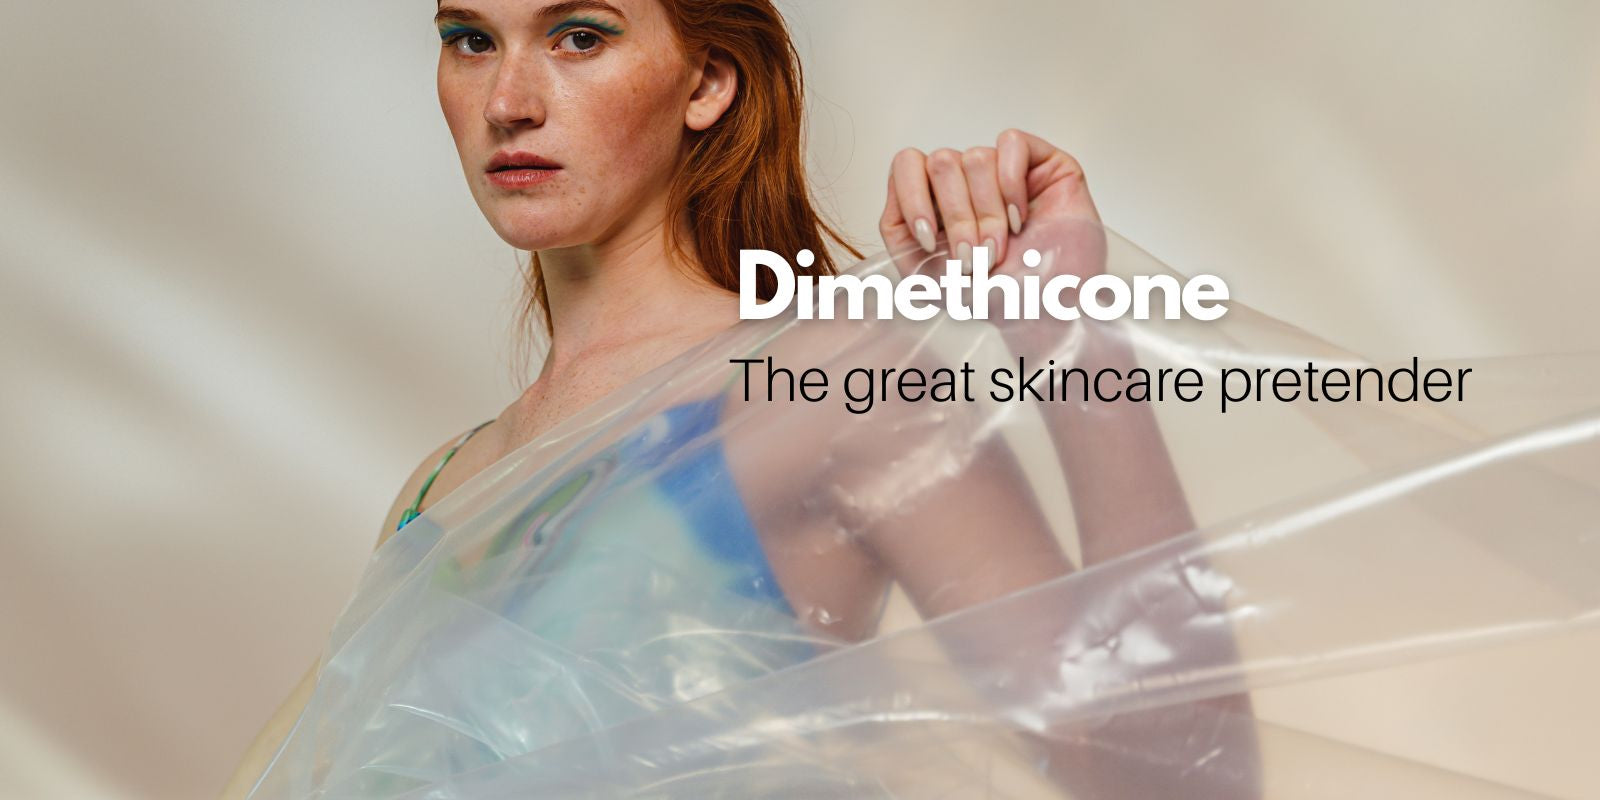 why we don't want dimethicone in our skincare products